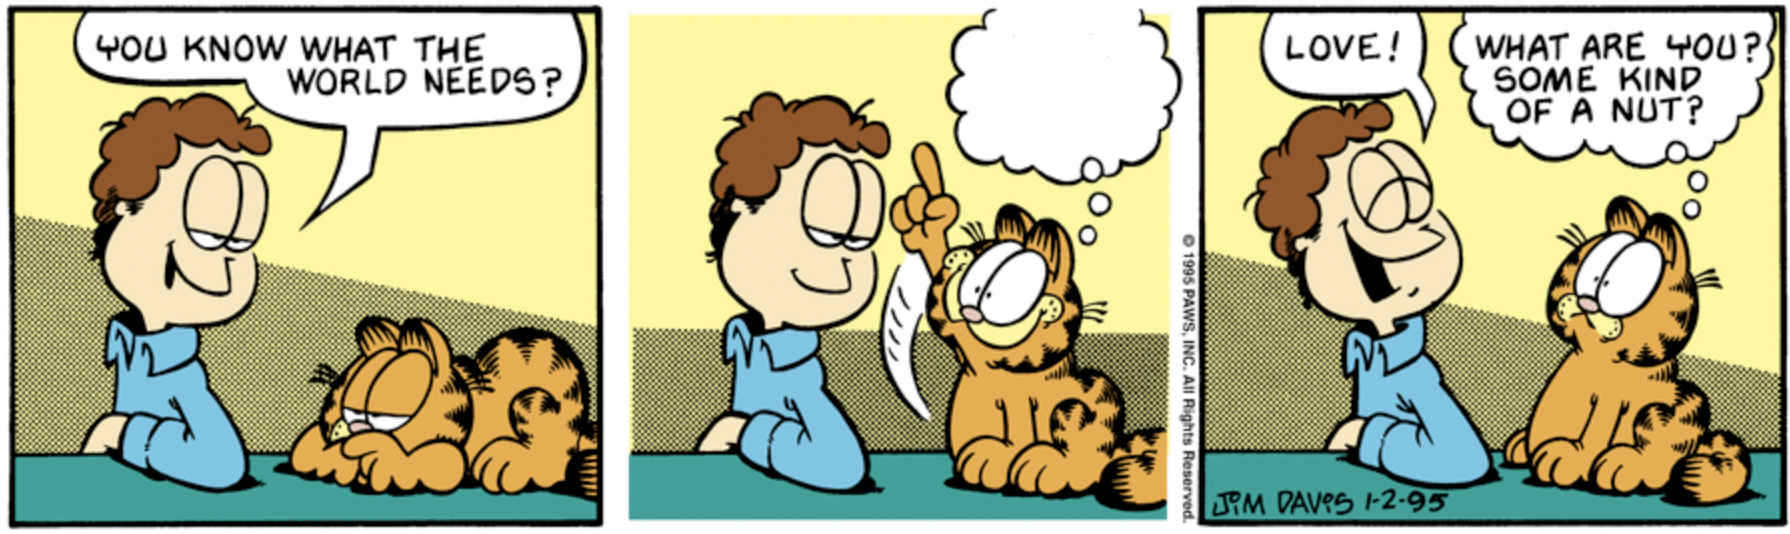 High Quality Garfield You Know What The World Needs? Blank Meme Template